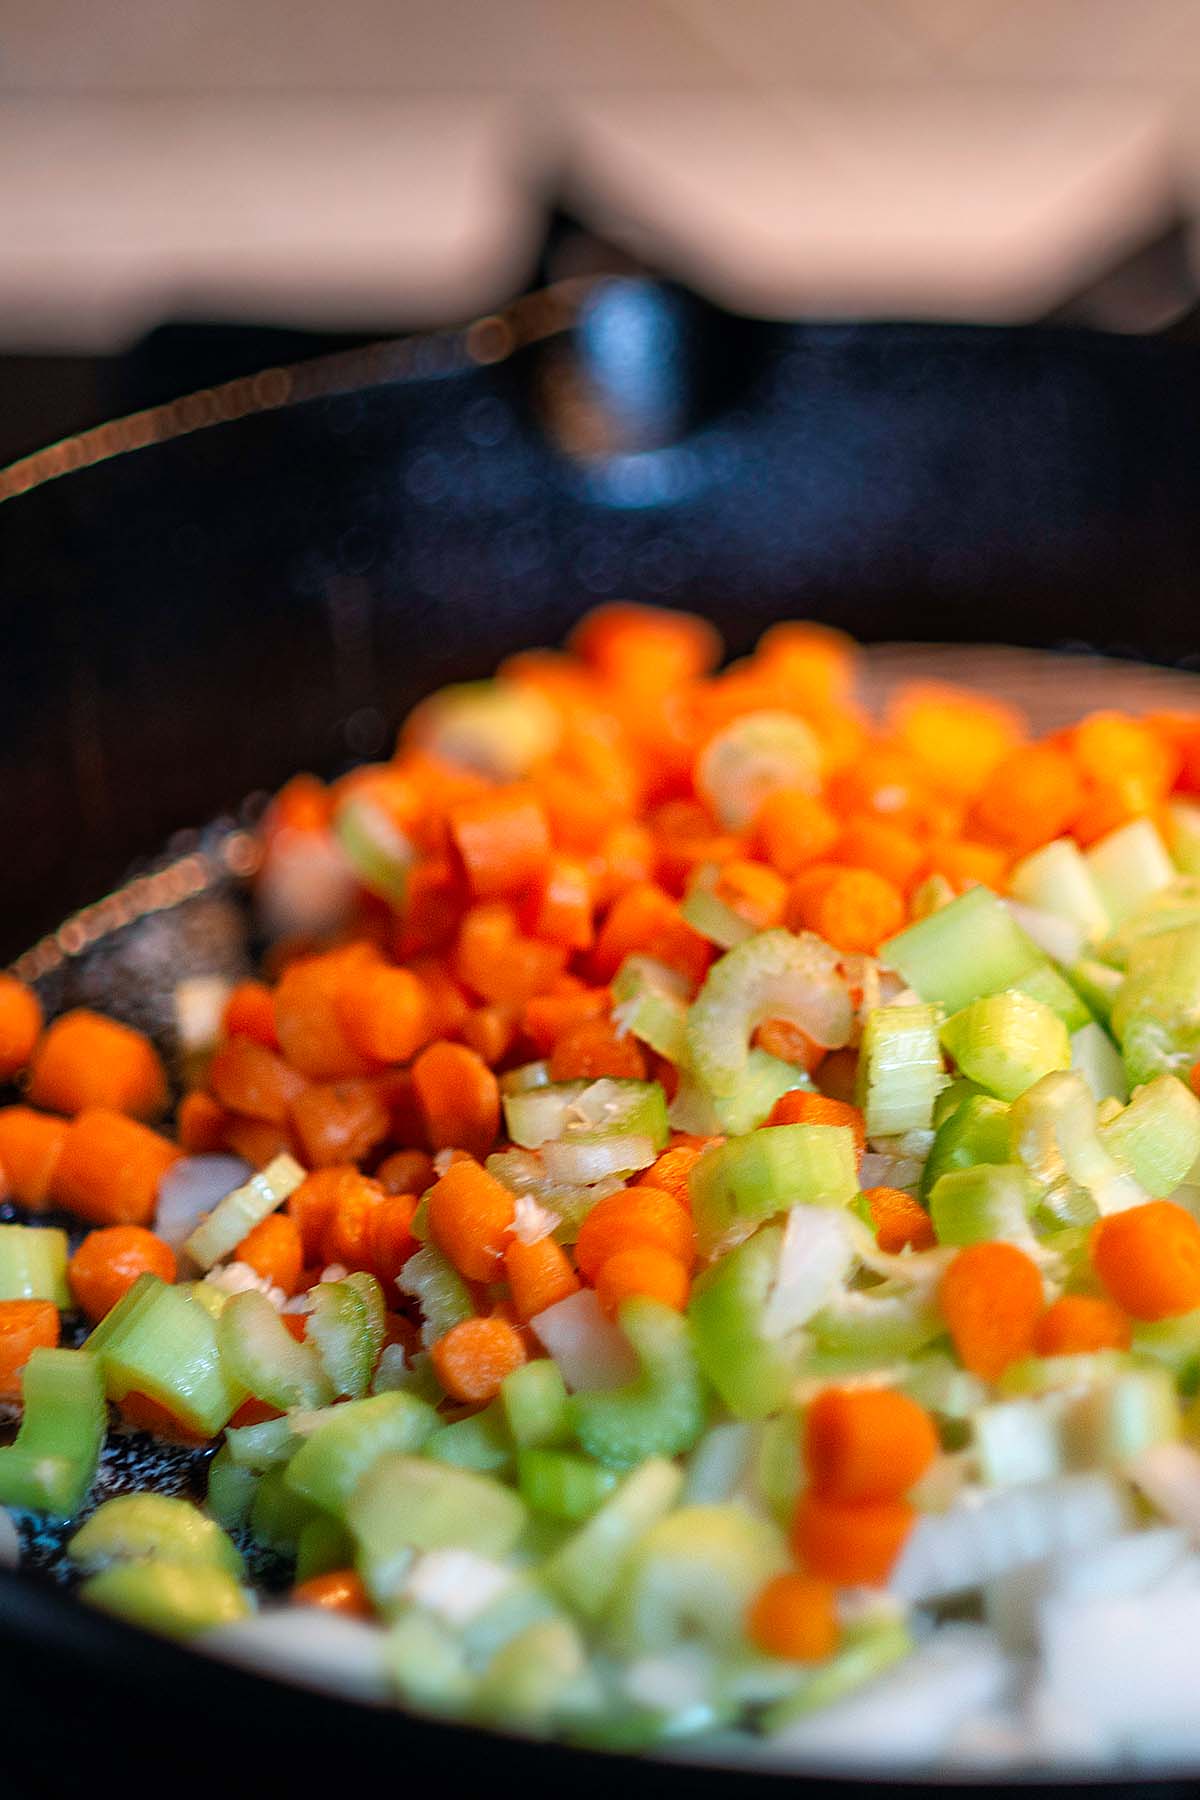 Carrots, celery, and onions being sautéd in a cast iron skillet.